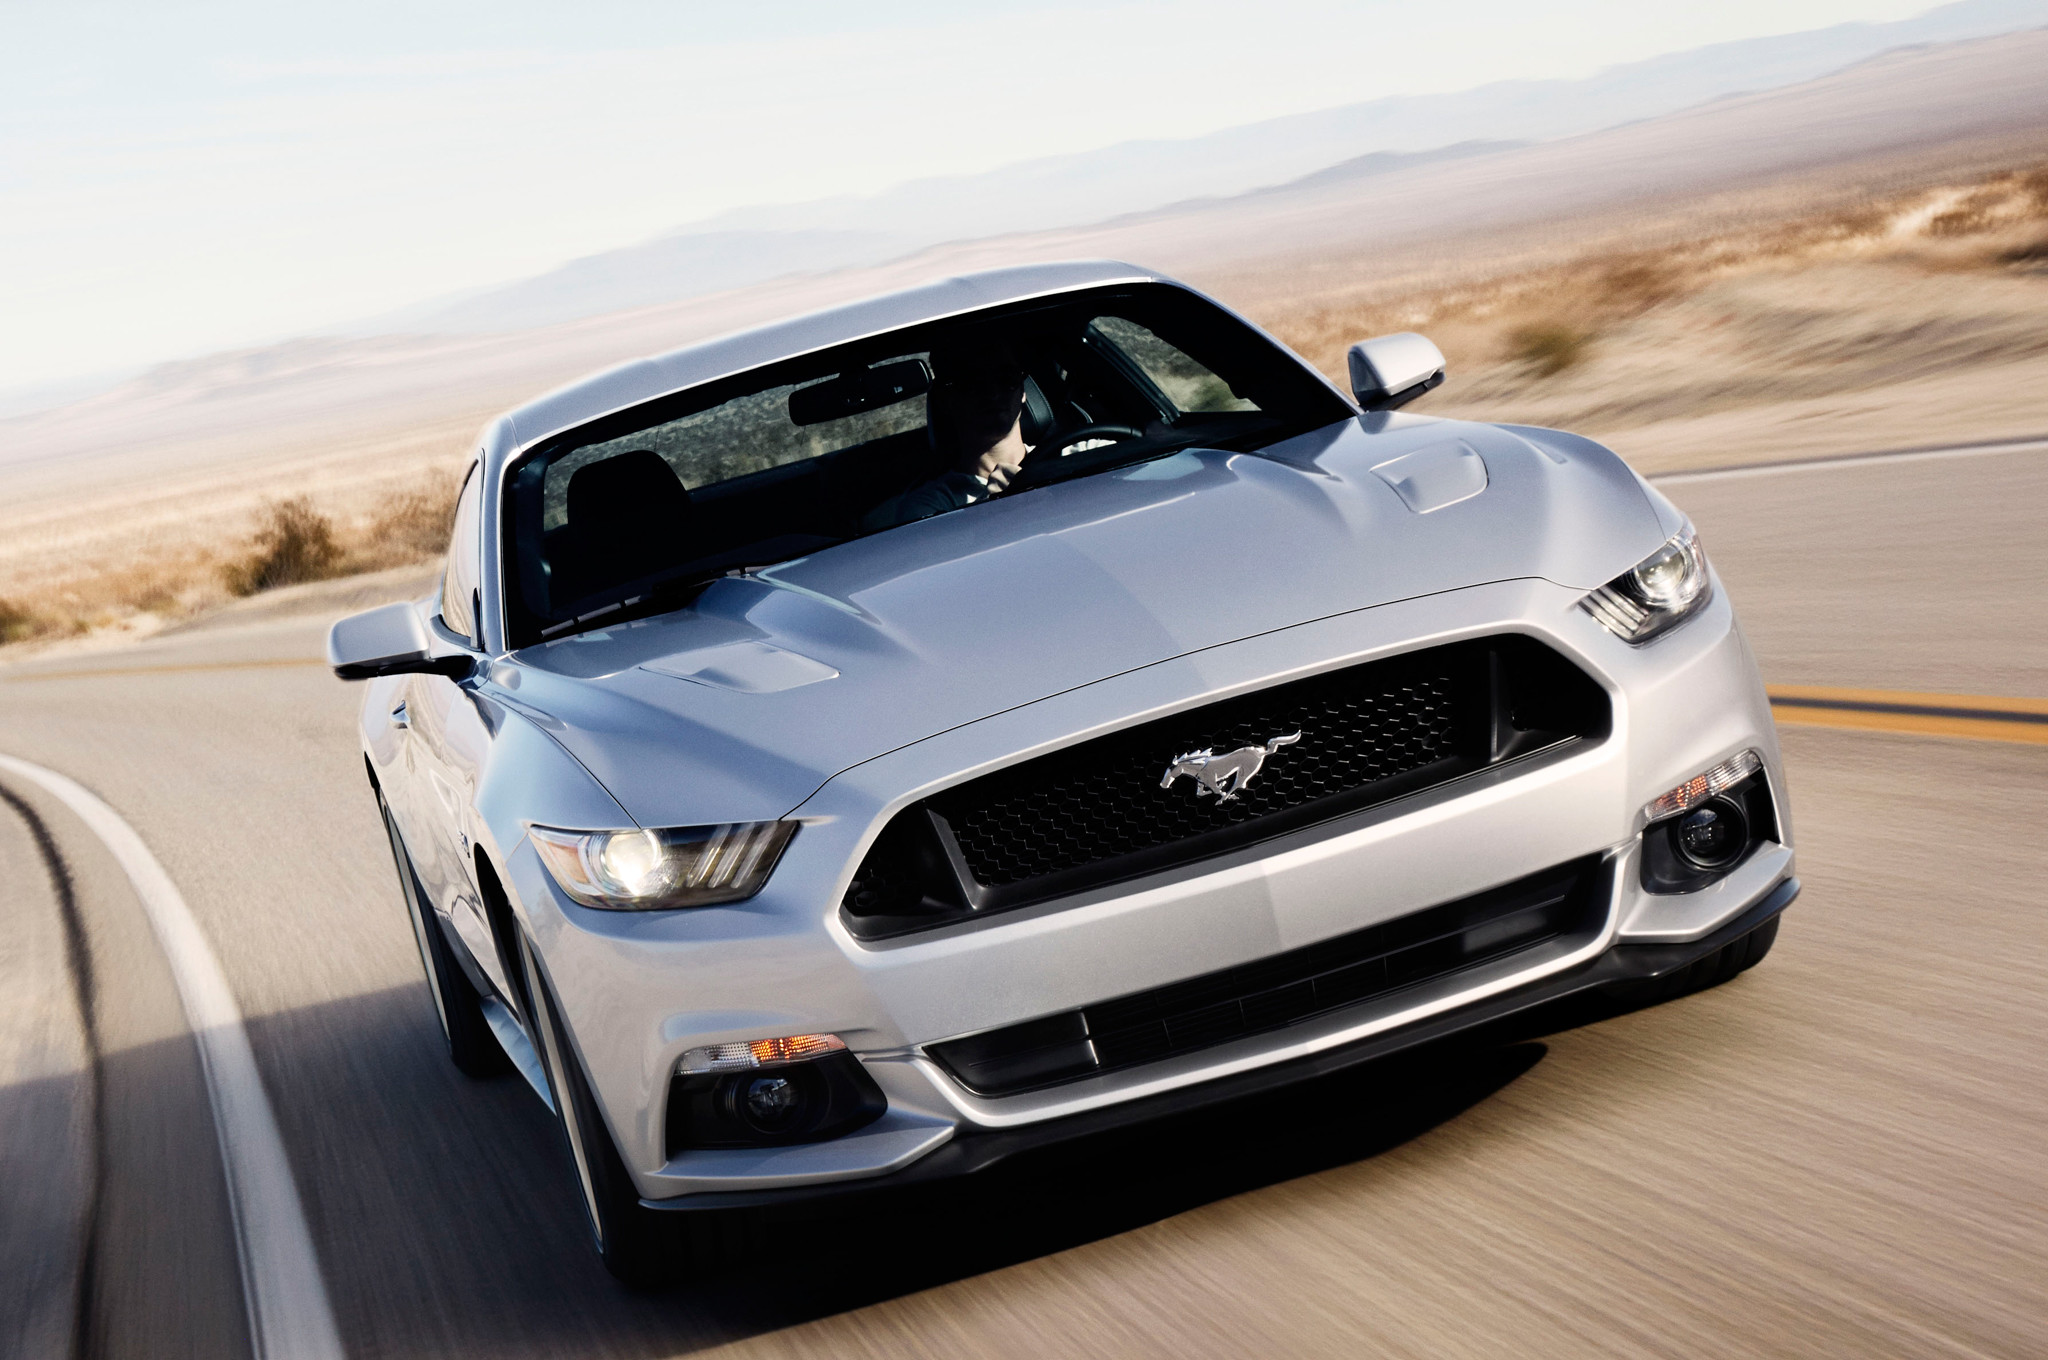 2048x1360 2015 Ford Mustang Wallpaper Iphone